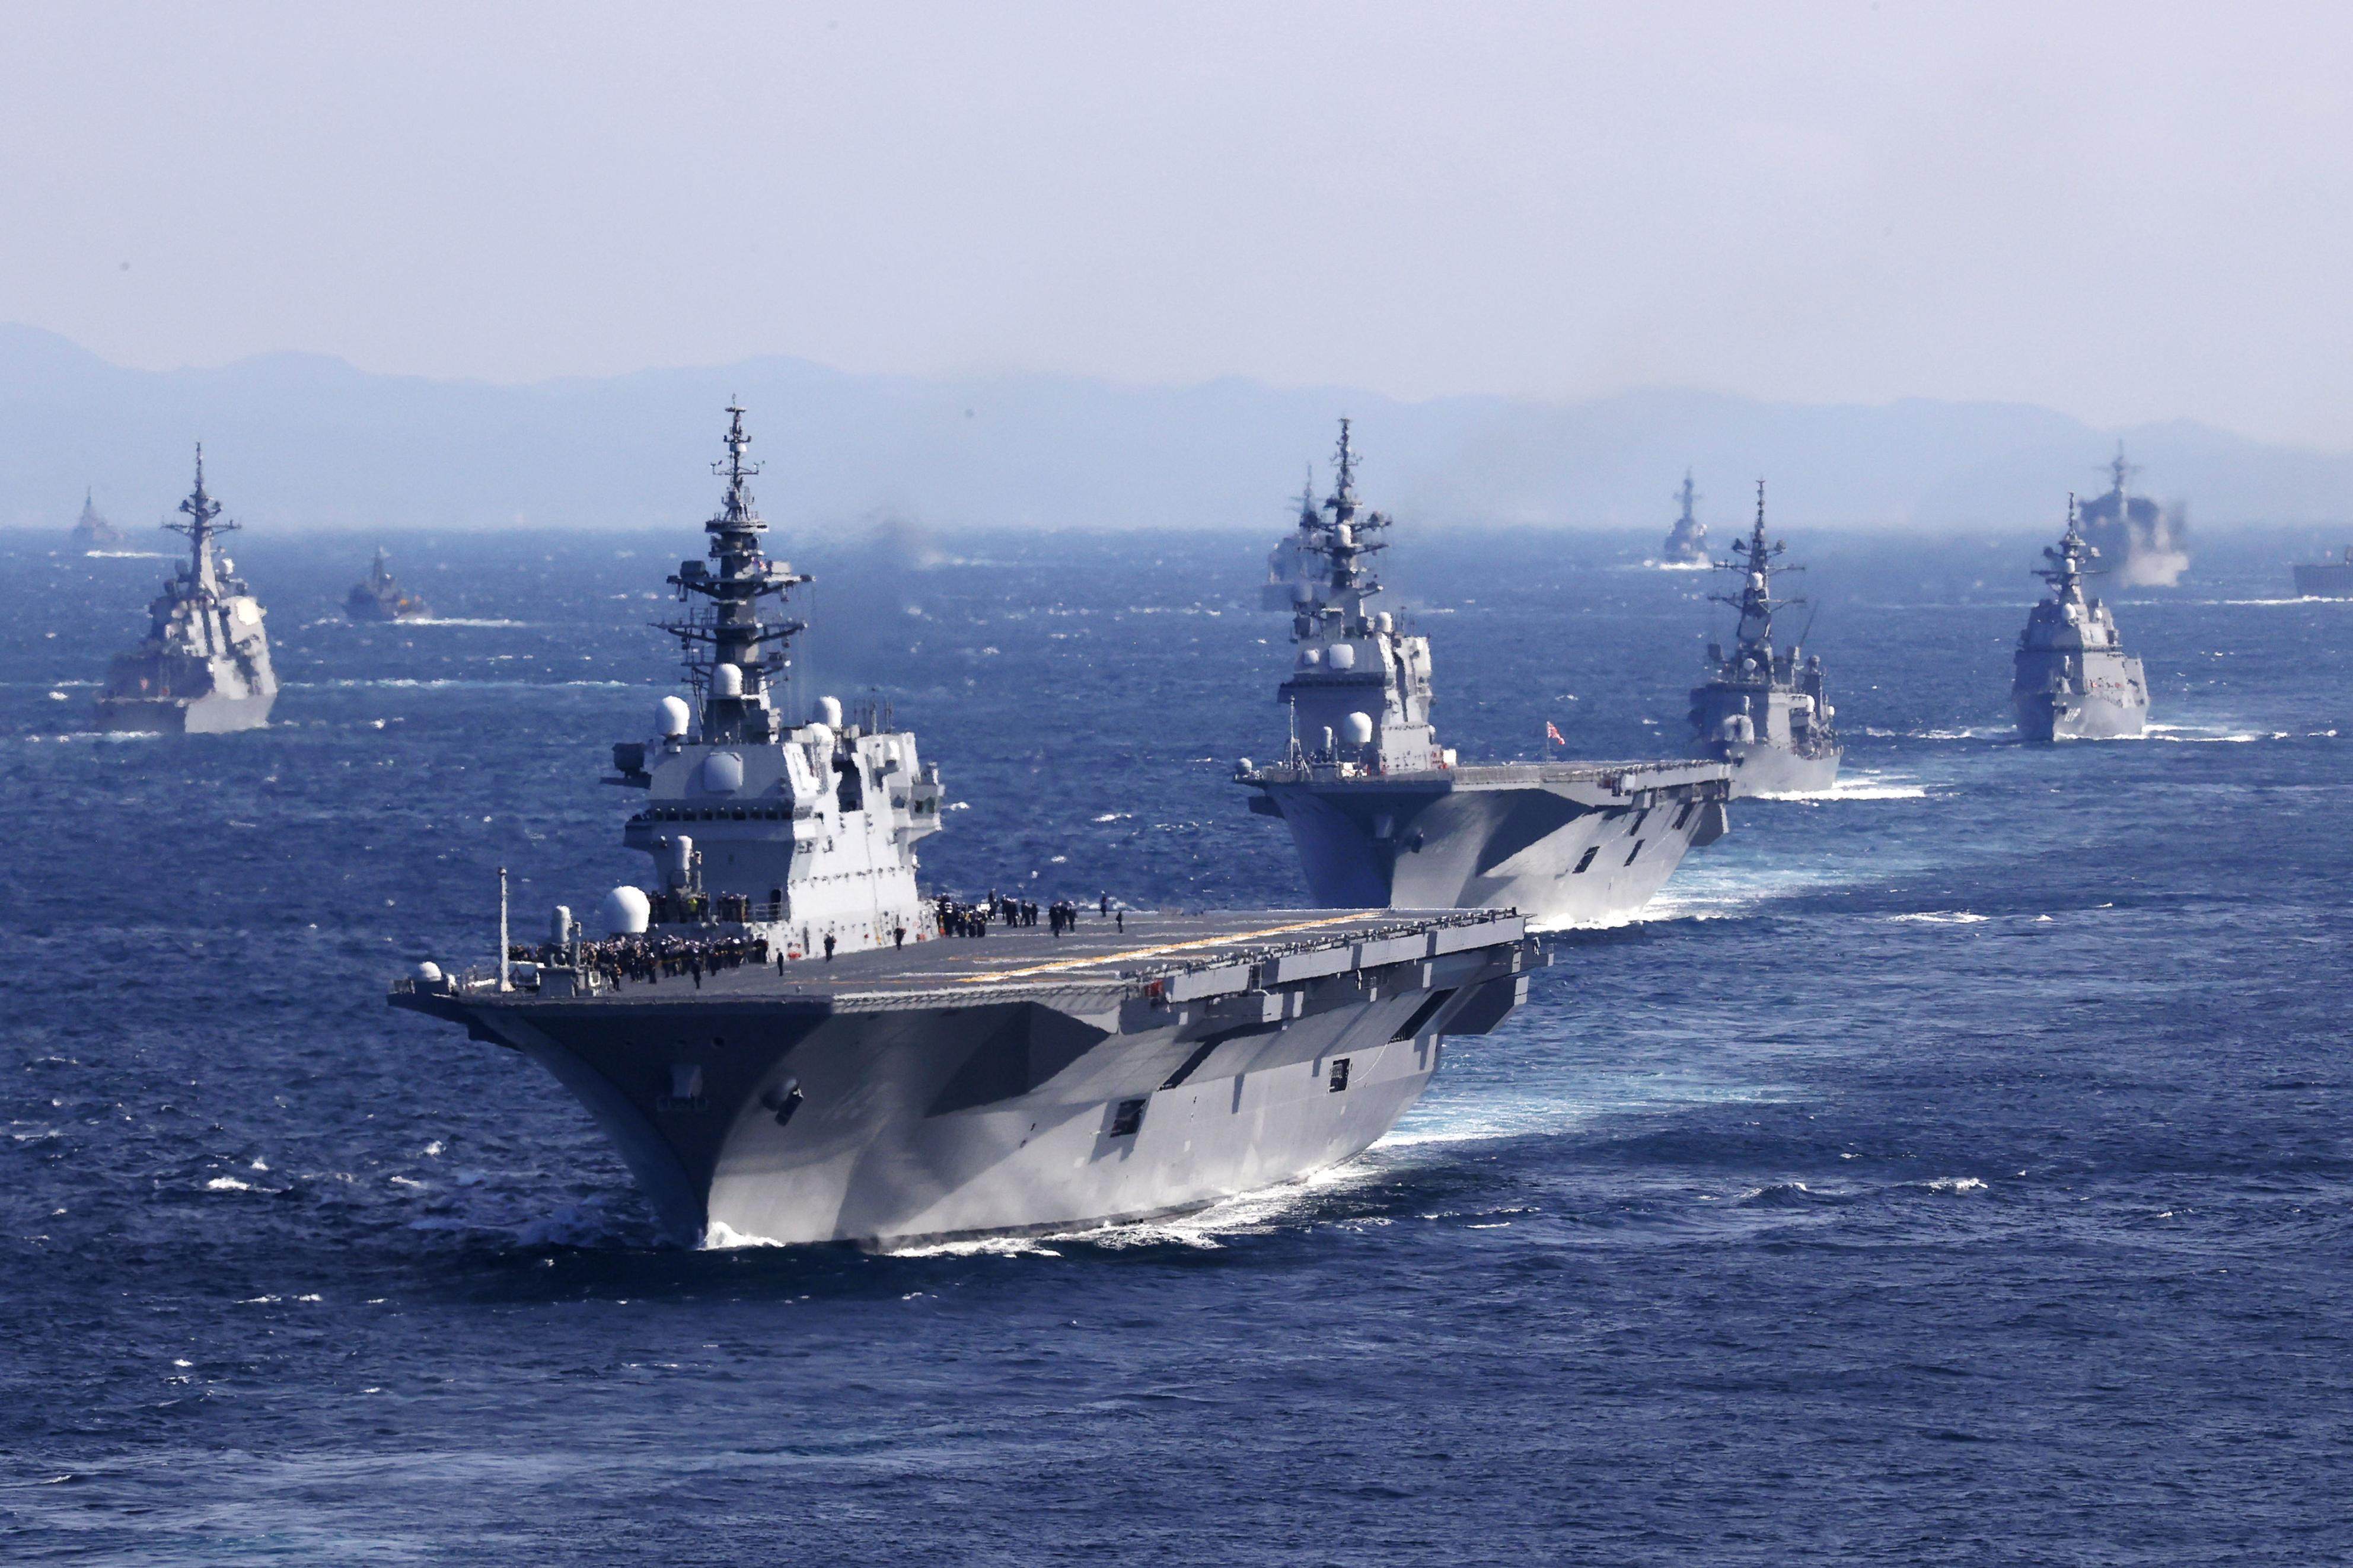 The helicopter destroyer Izumo of Japan’s Maritime Self-Defence Force seen with other warships in November 2022. Drone footage of the ship, taken while it was docked at a military base, has been circulating on Chinese social media. Photo: Kyodo News via AP